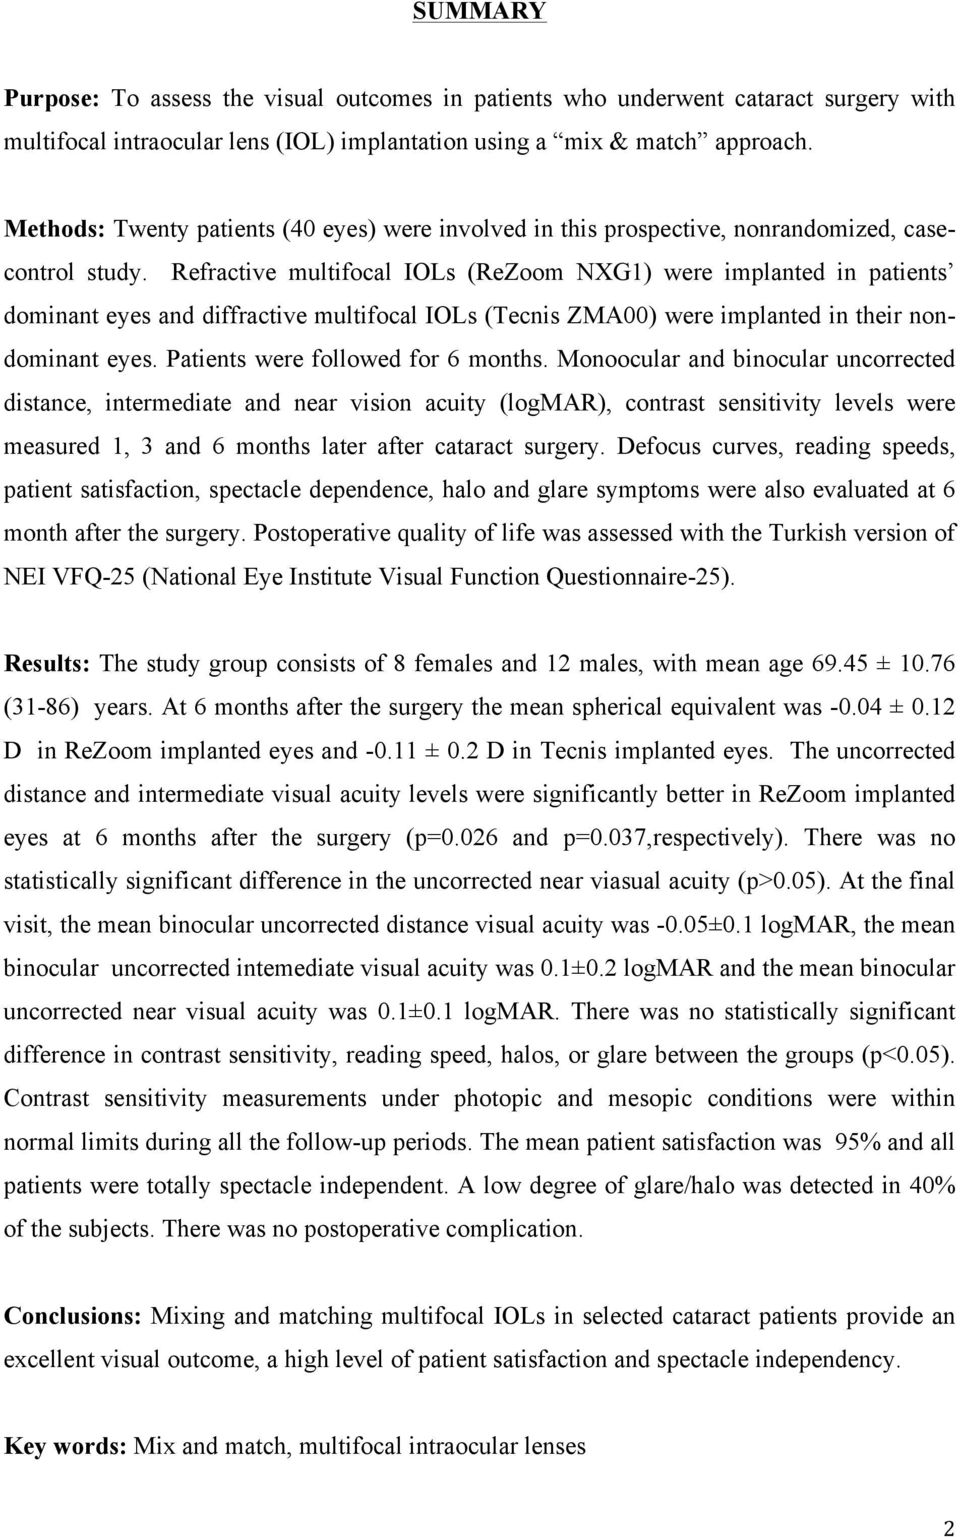 Refractive multifocal IOLs (ReZoom NXG1) were implanted in patients dominant eyes and diffractive multifocal IOLs (Tecnis ZMA00) were implanted in their nondominant eyes.